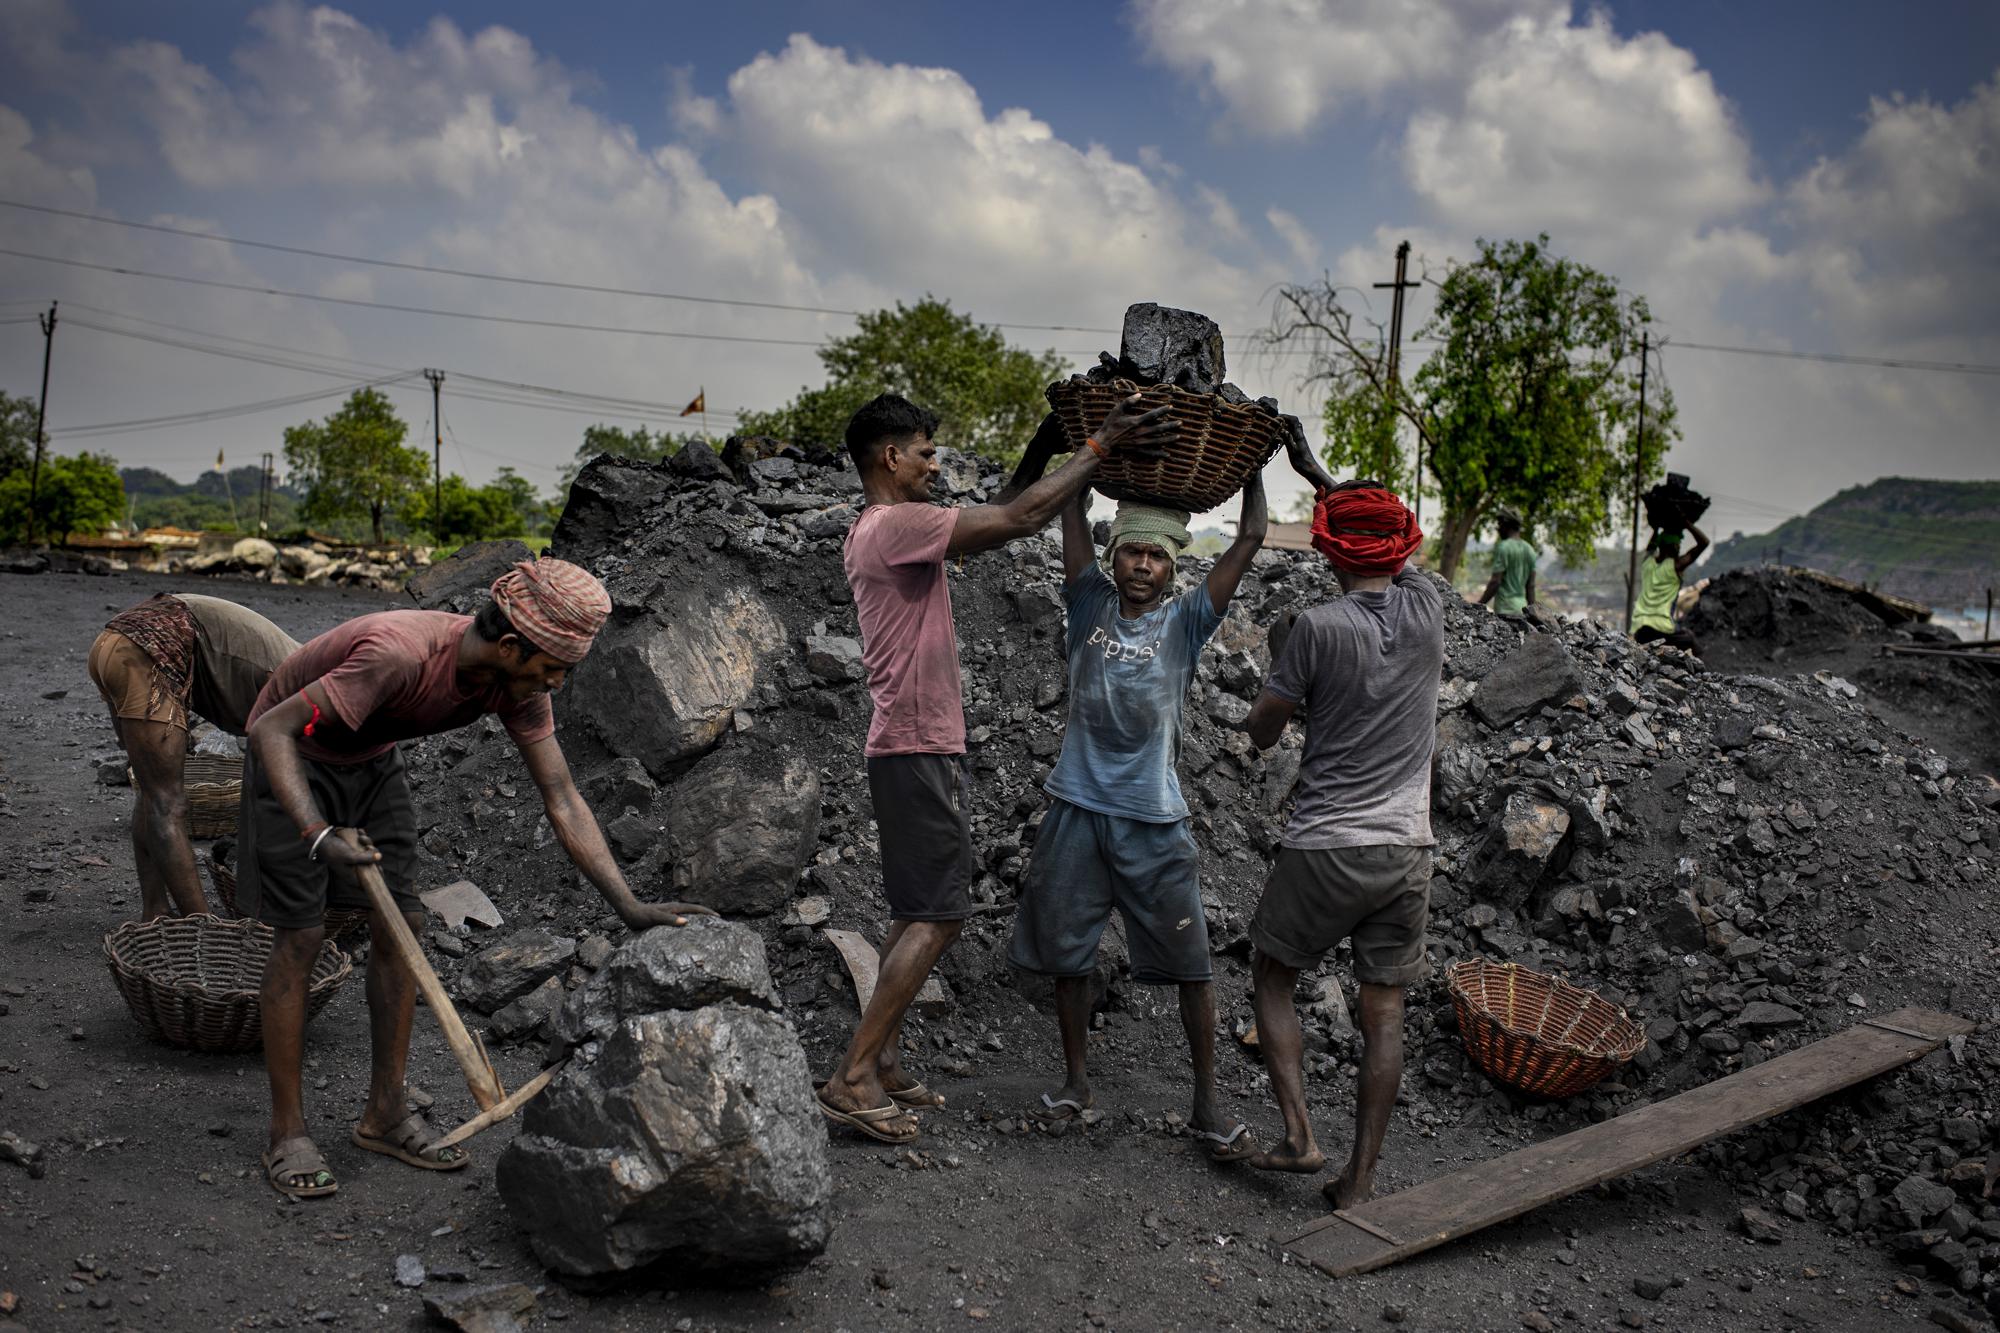 Laborers load coal onto trucks for transportation near Dhanbad, an eastern Indian city in Jharkhand state, Friday, Sept. 24, 2021. A 2021 Indian government study found that Jharkhand state -- among the poorest in India and the state with the nation’s largest coal reserves -- is also the most vulnerable Indian state to climate change. Efforts to fight climate change are being held back in part because coal, the biggest single source of climate-changing gases, provides cheap electricity and supports millions of jobs. It's one of the dilemmas facing world leaders gathered in Glasgow, Scotland this week in an attempt to stave off the worst effects of climate change. (AP Photo/Altaf Qadri)